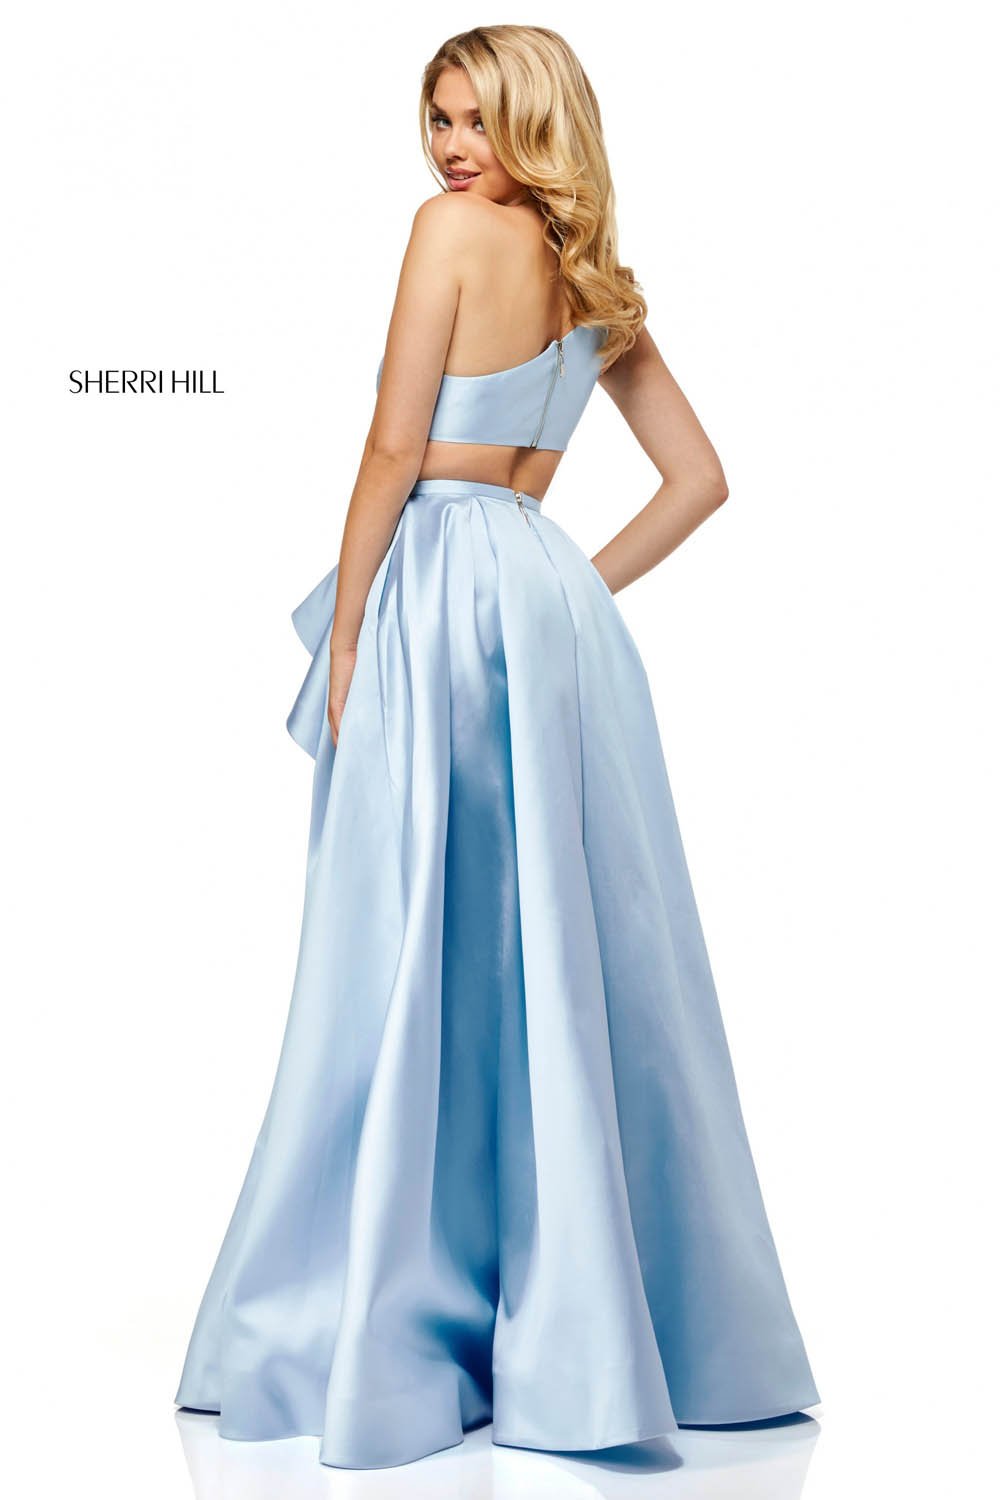 Sherri Hill 52577 dress images in these colors: Light Blue, Lilac, Red, Navy, Yellow.